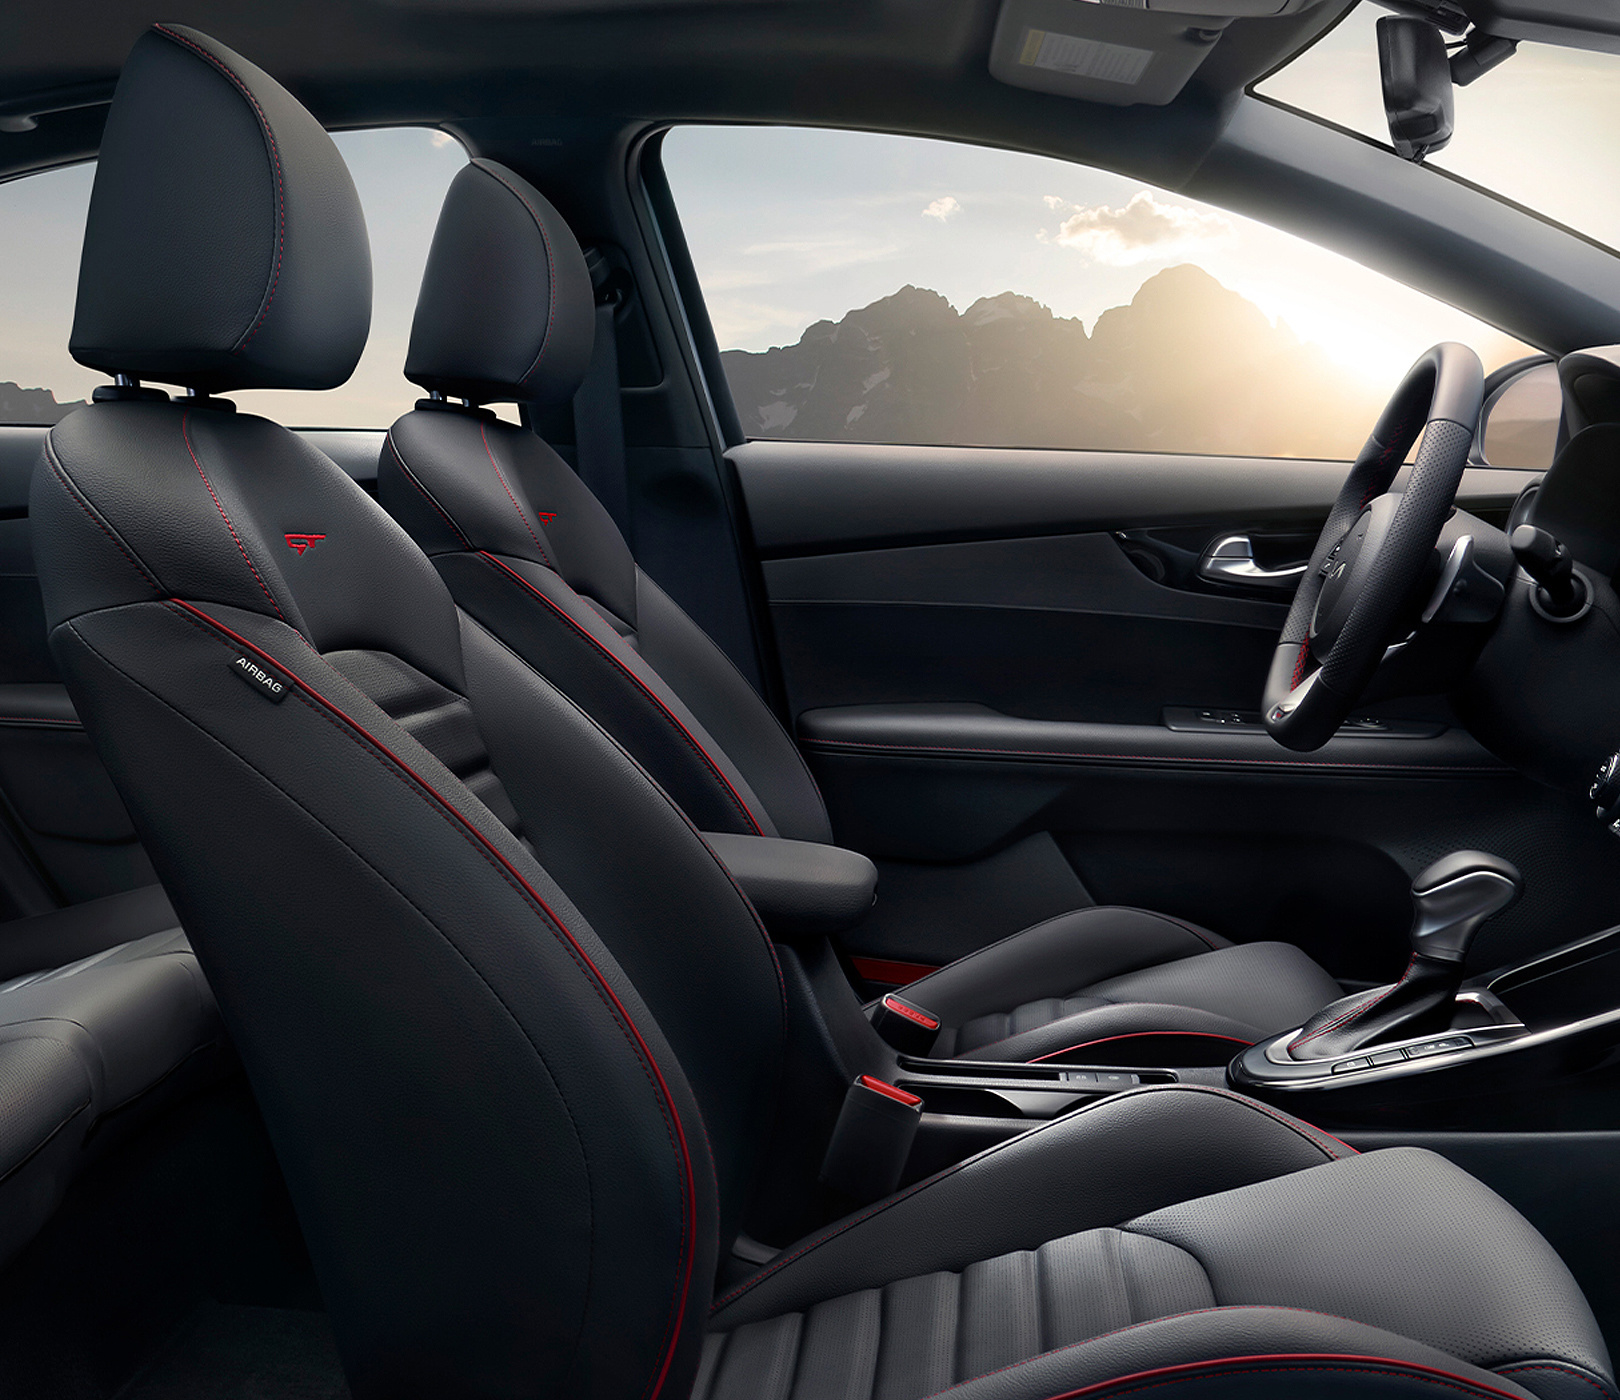 2023 Kia Forte Interior Spacious Cabin And Best-In-Class Cargo Space